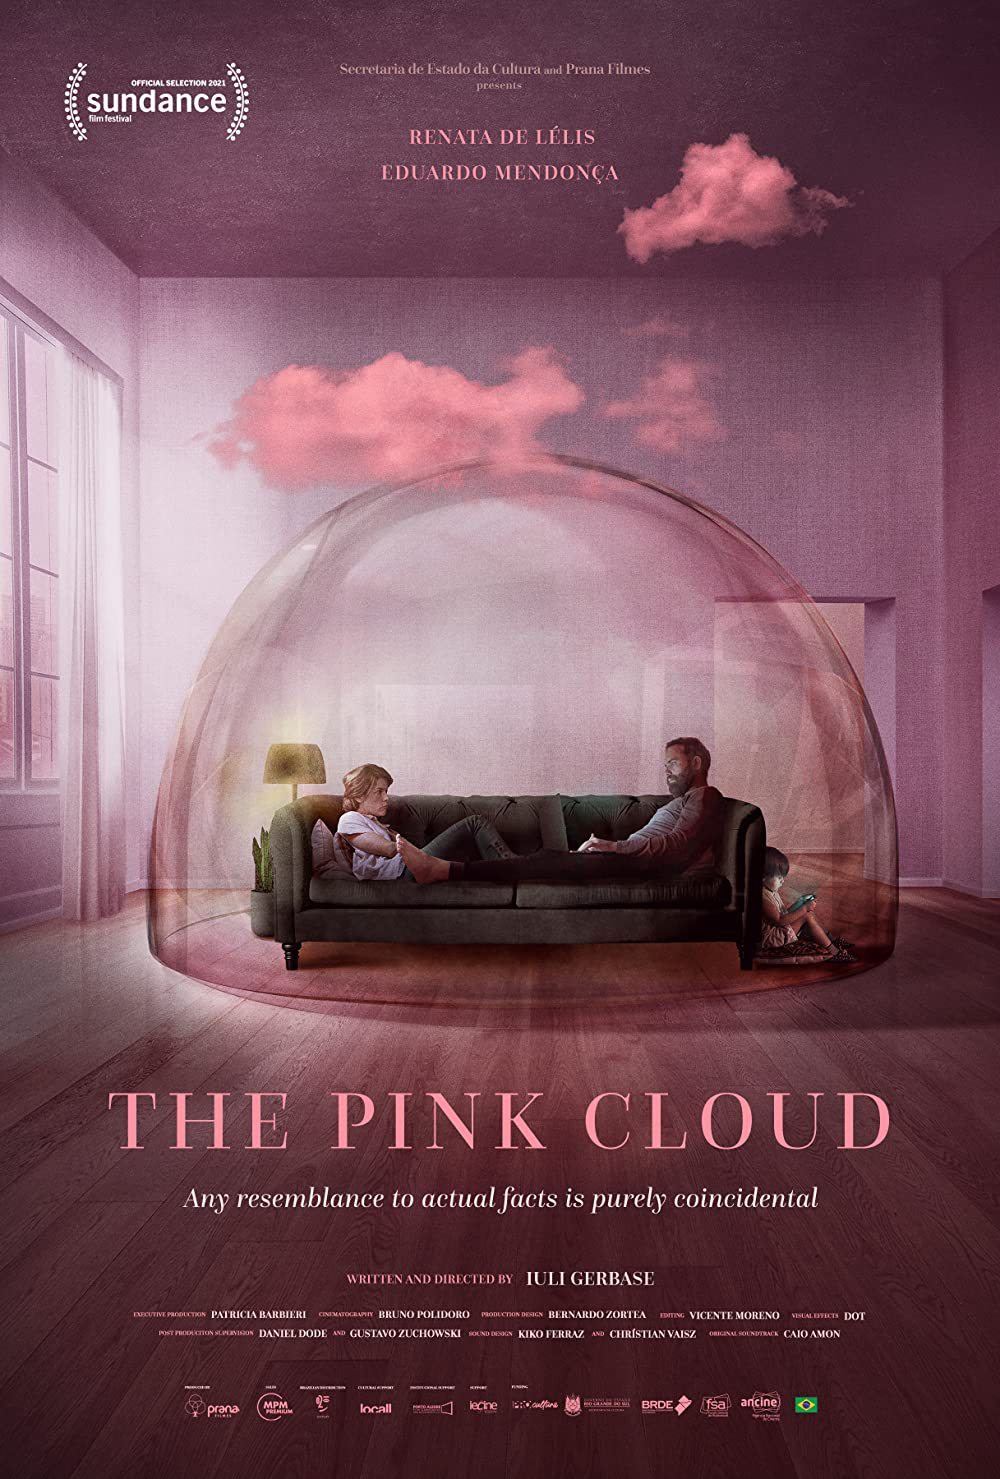 Through a Pink Cloud, Darkly: A Review of Iuli Gerbase’s The Pink Cloud